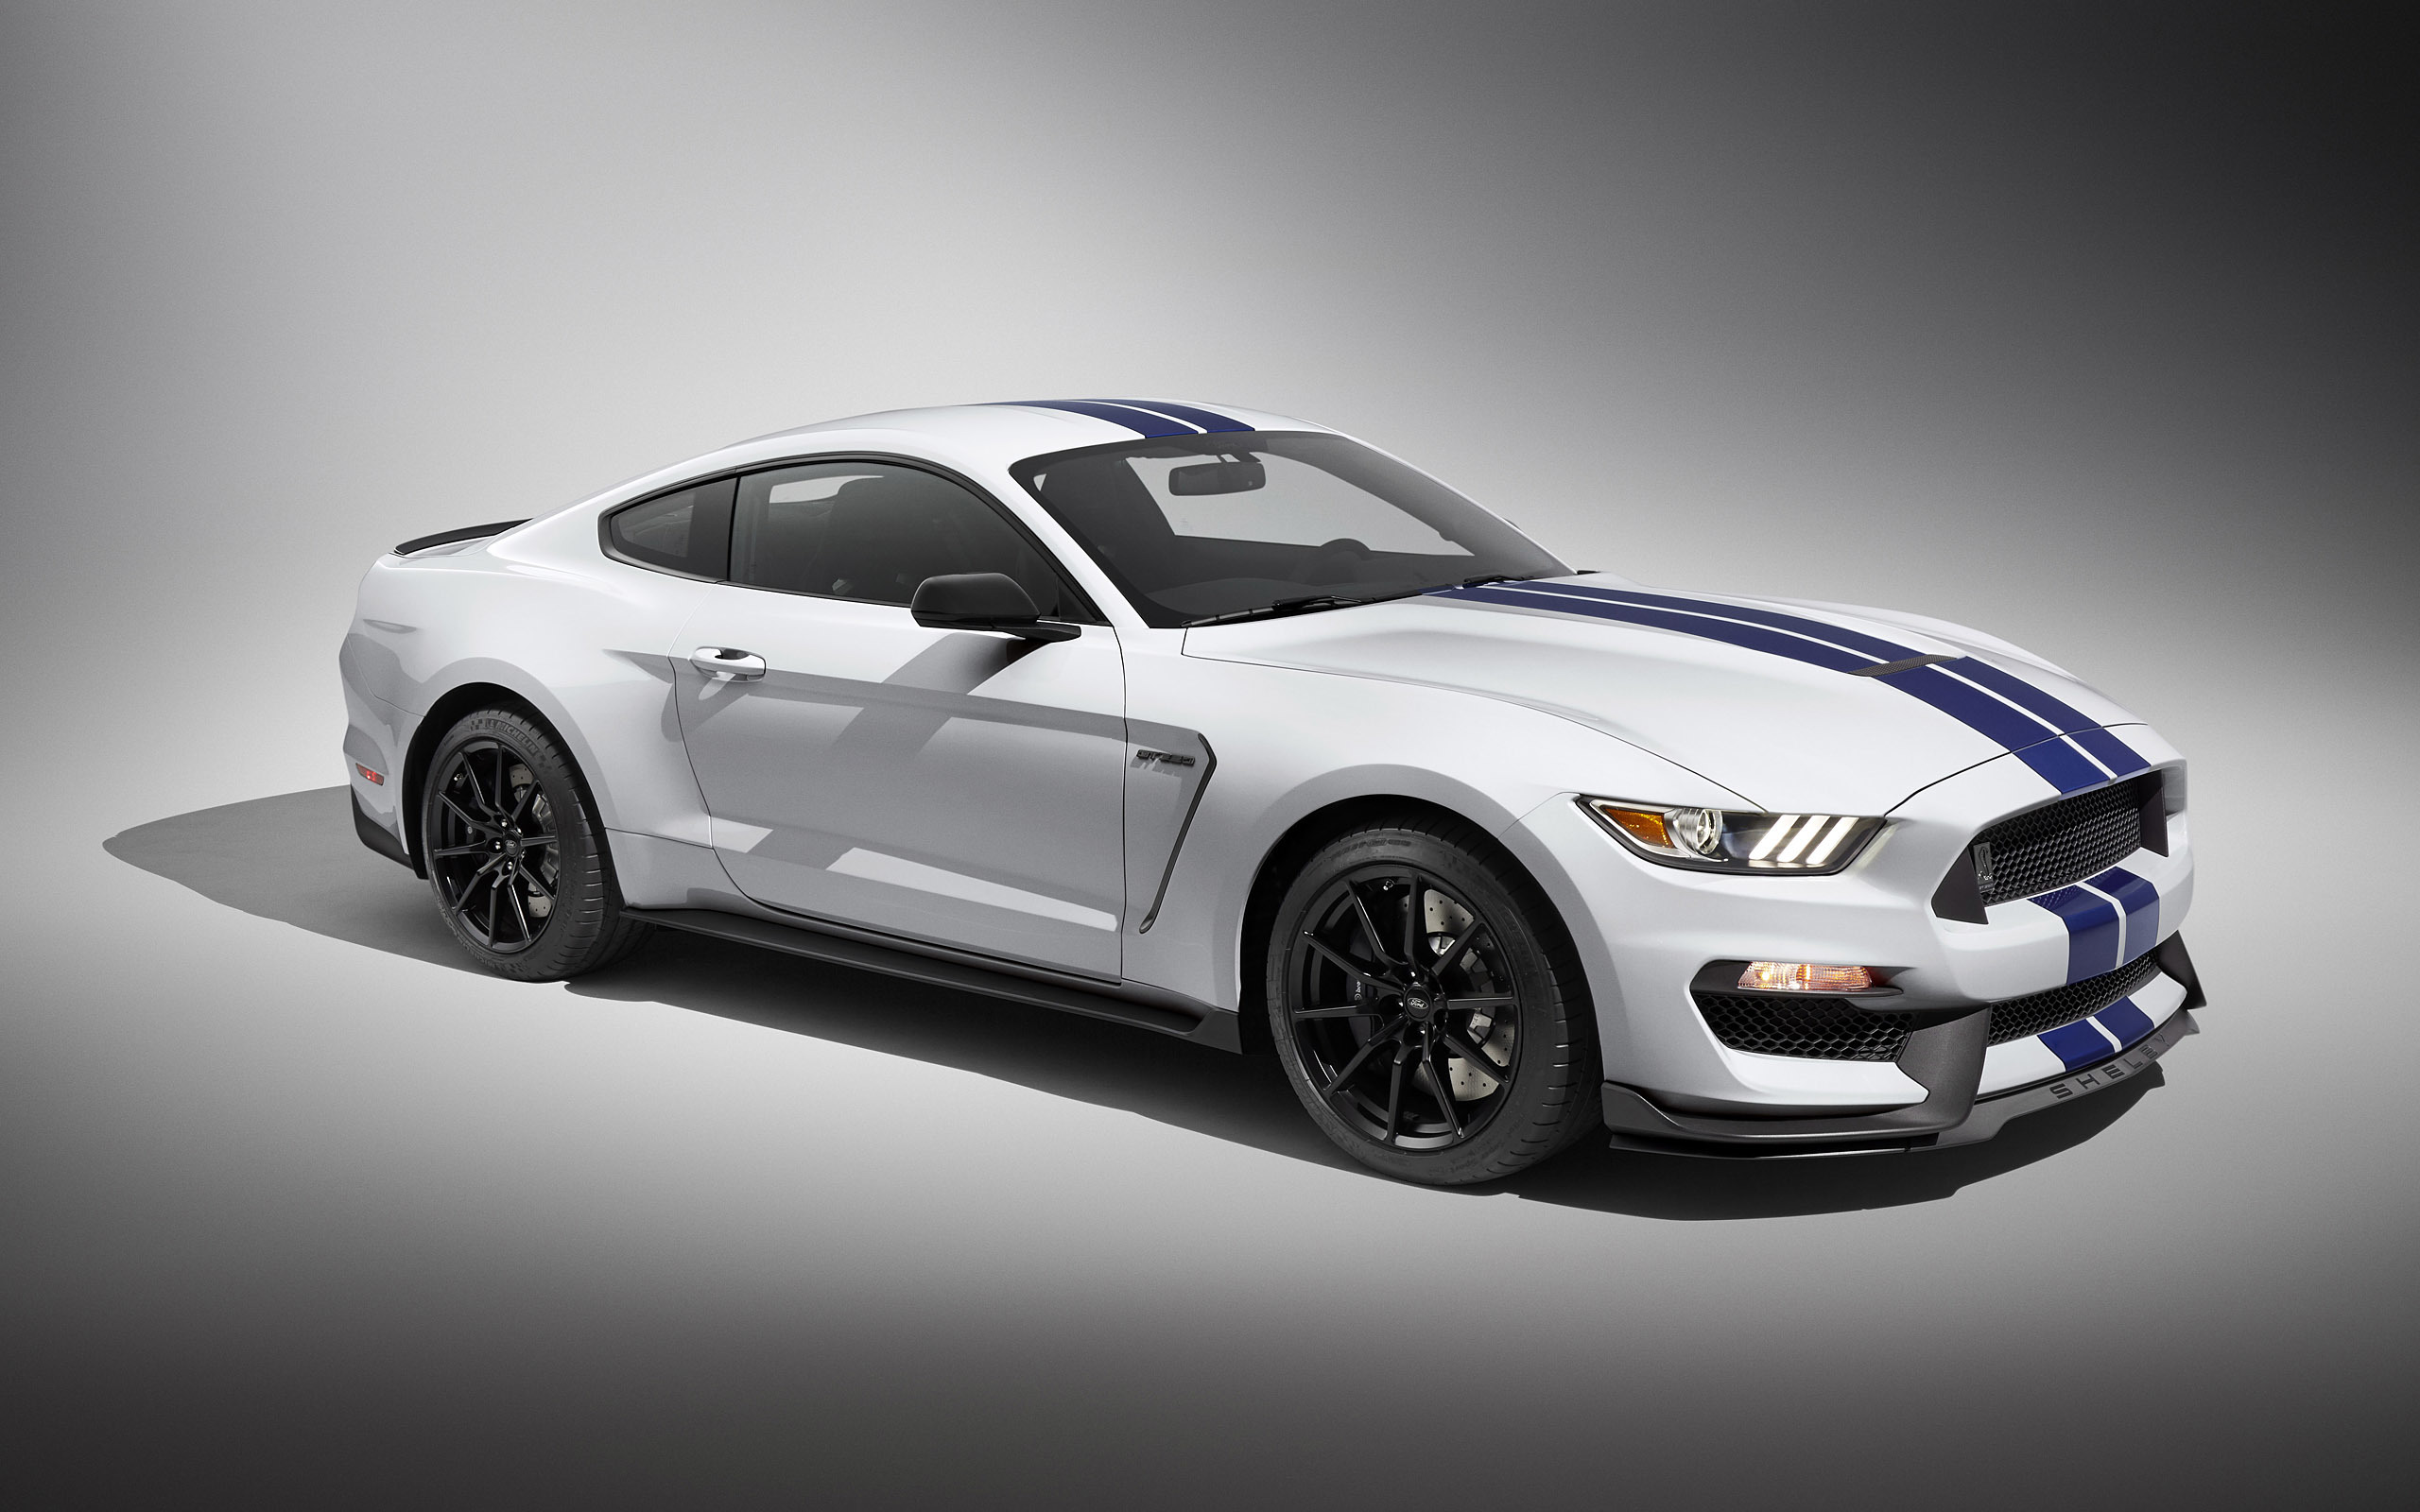 Wallpaper Ford Mustang Shelby Gt350 Car Pictures And